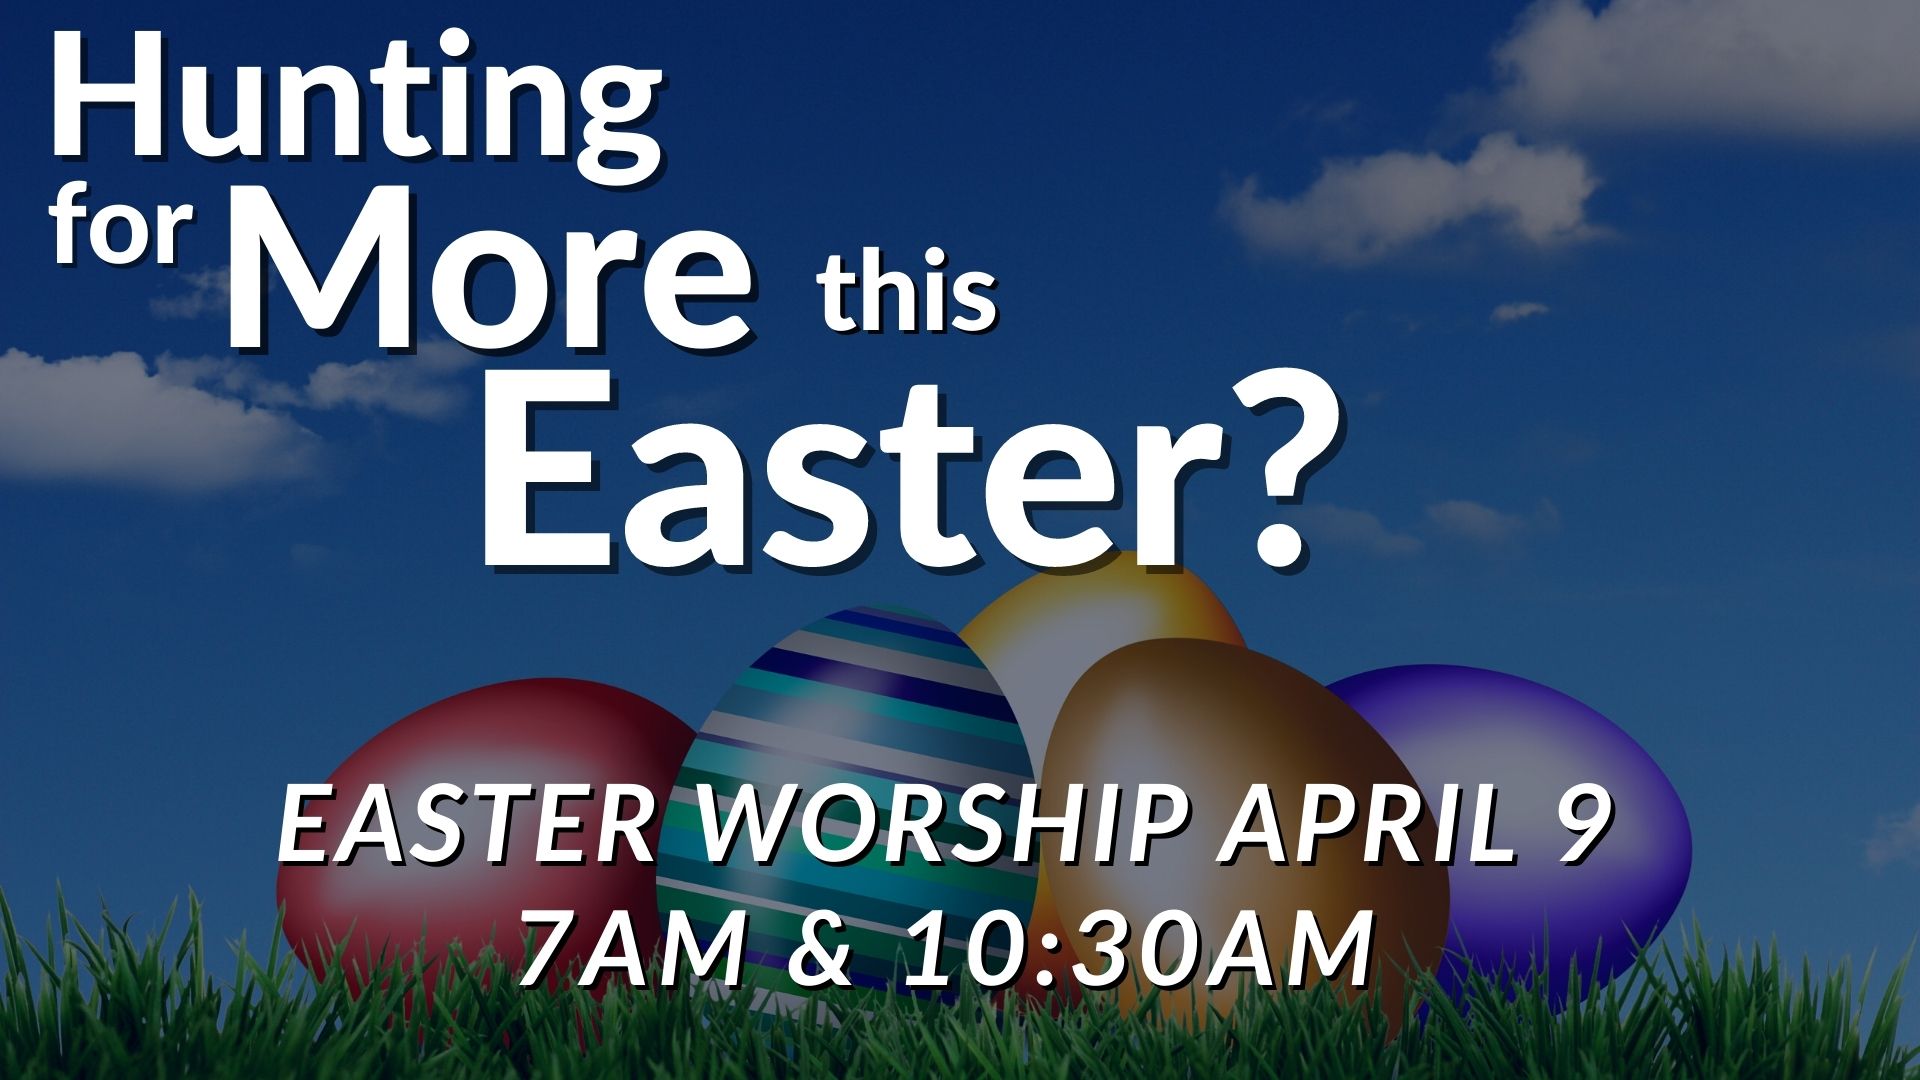 Easter Southwest services